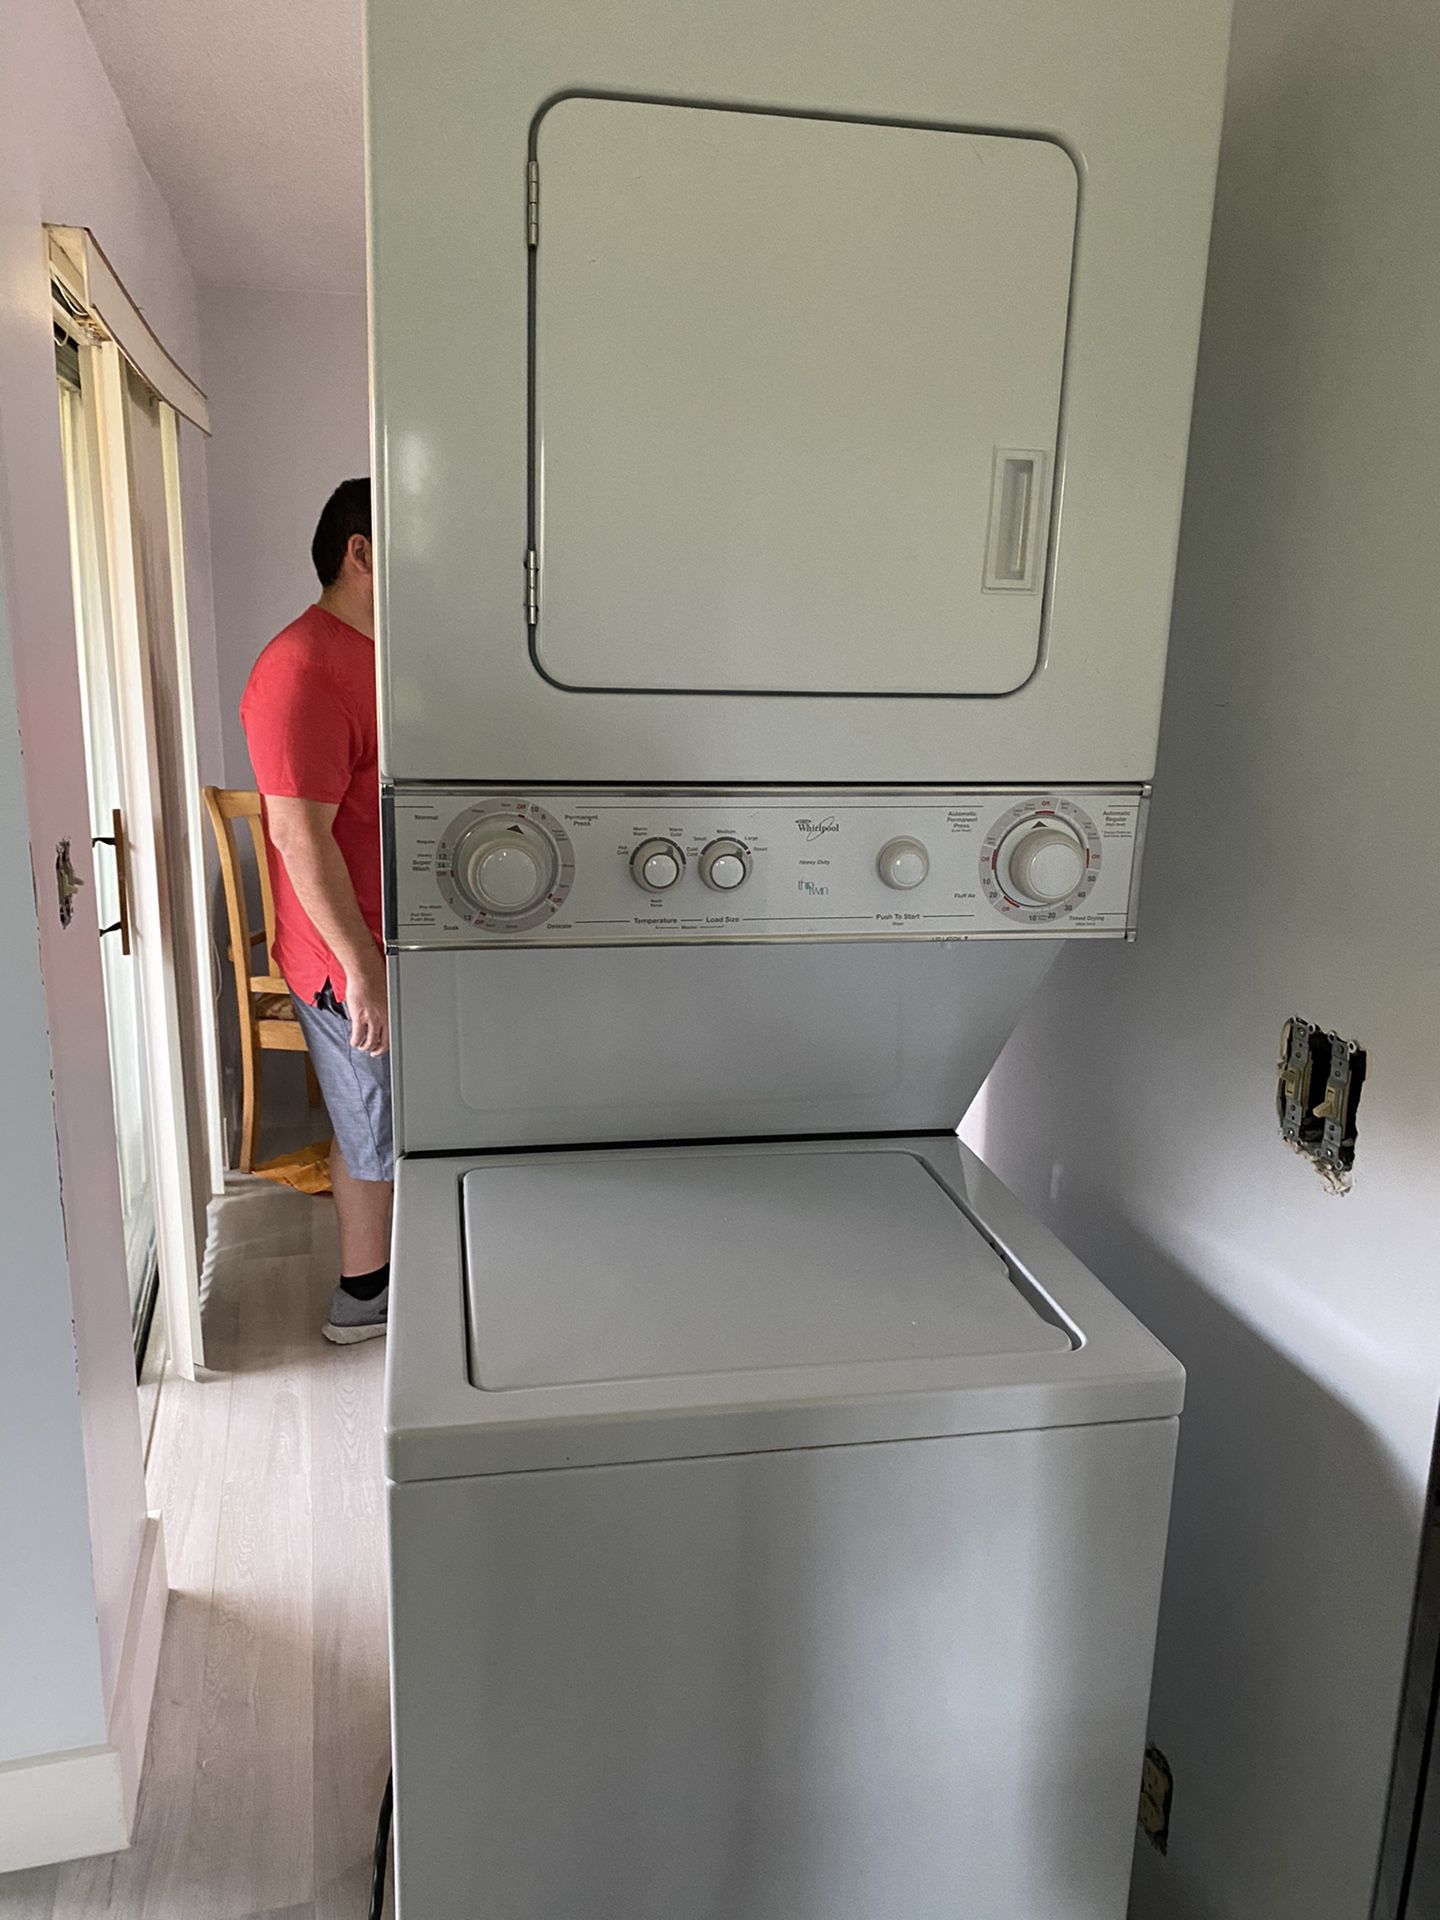 Whirlpool thin twin washer and dryer